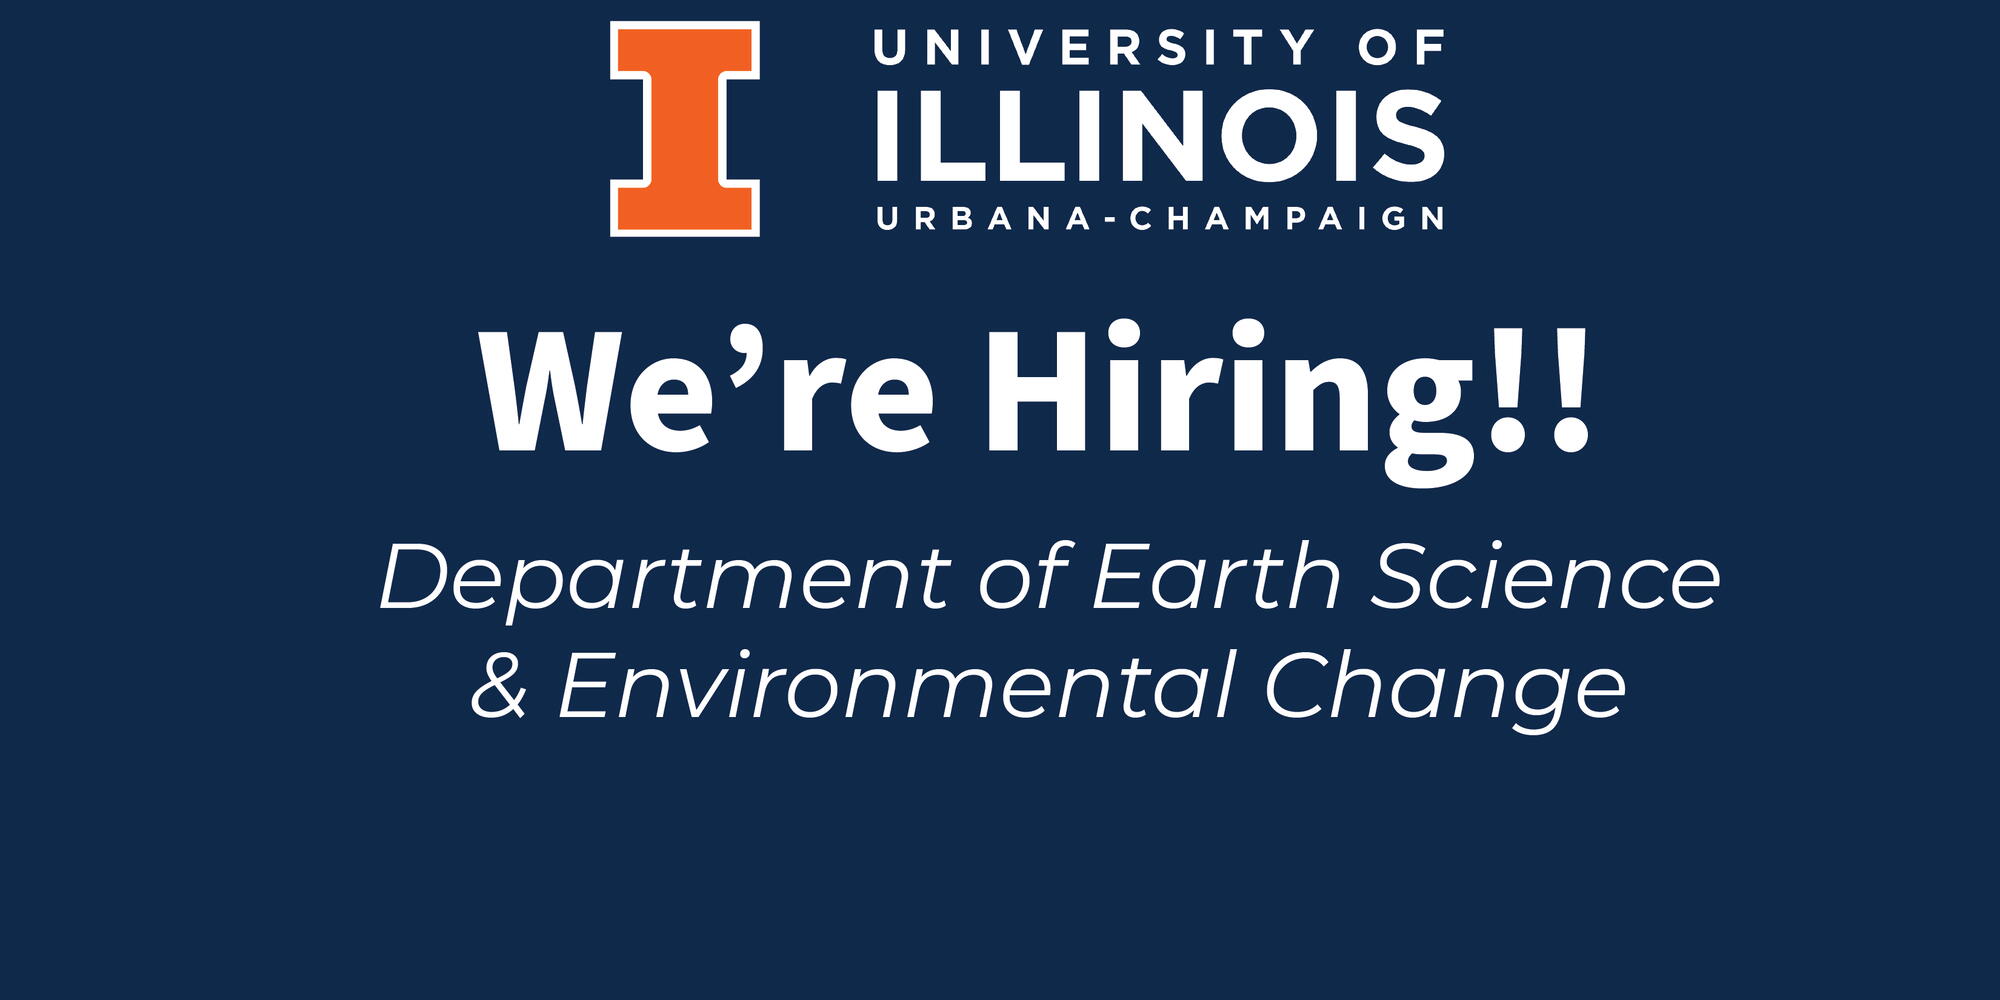 Department of Earth Science and Enviromental Change is Hiring